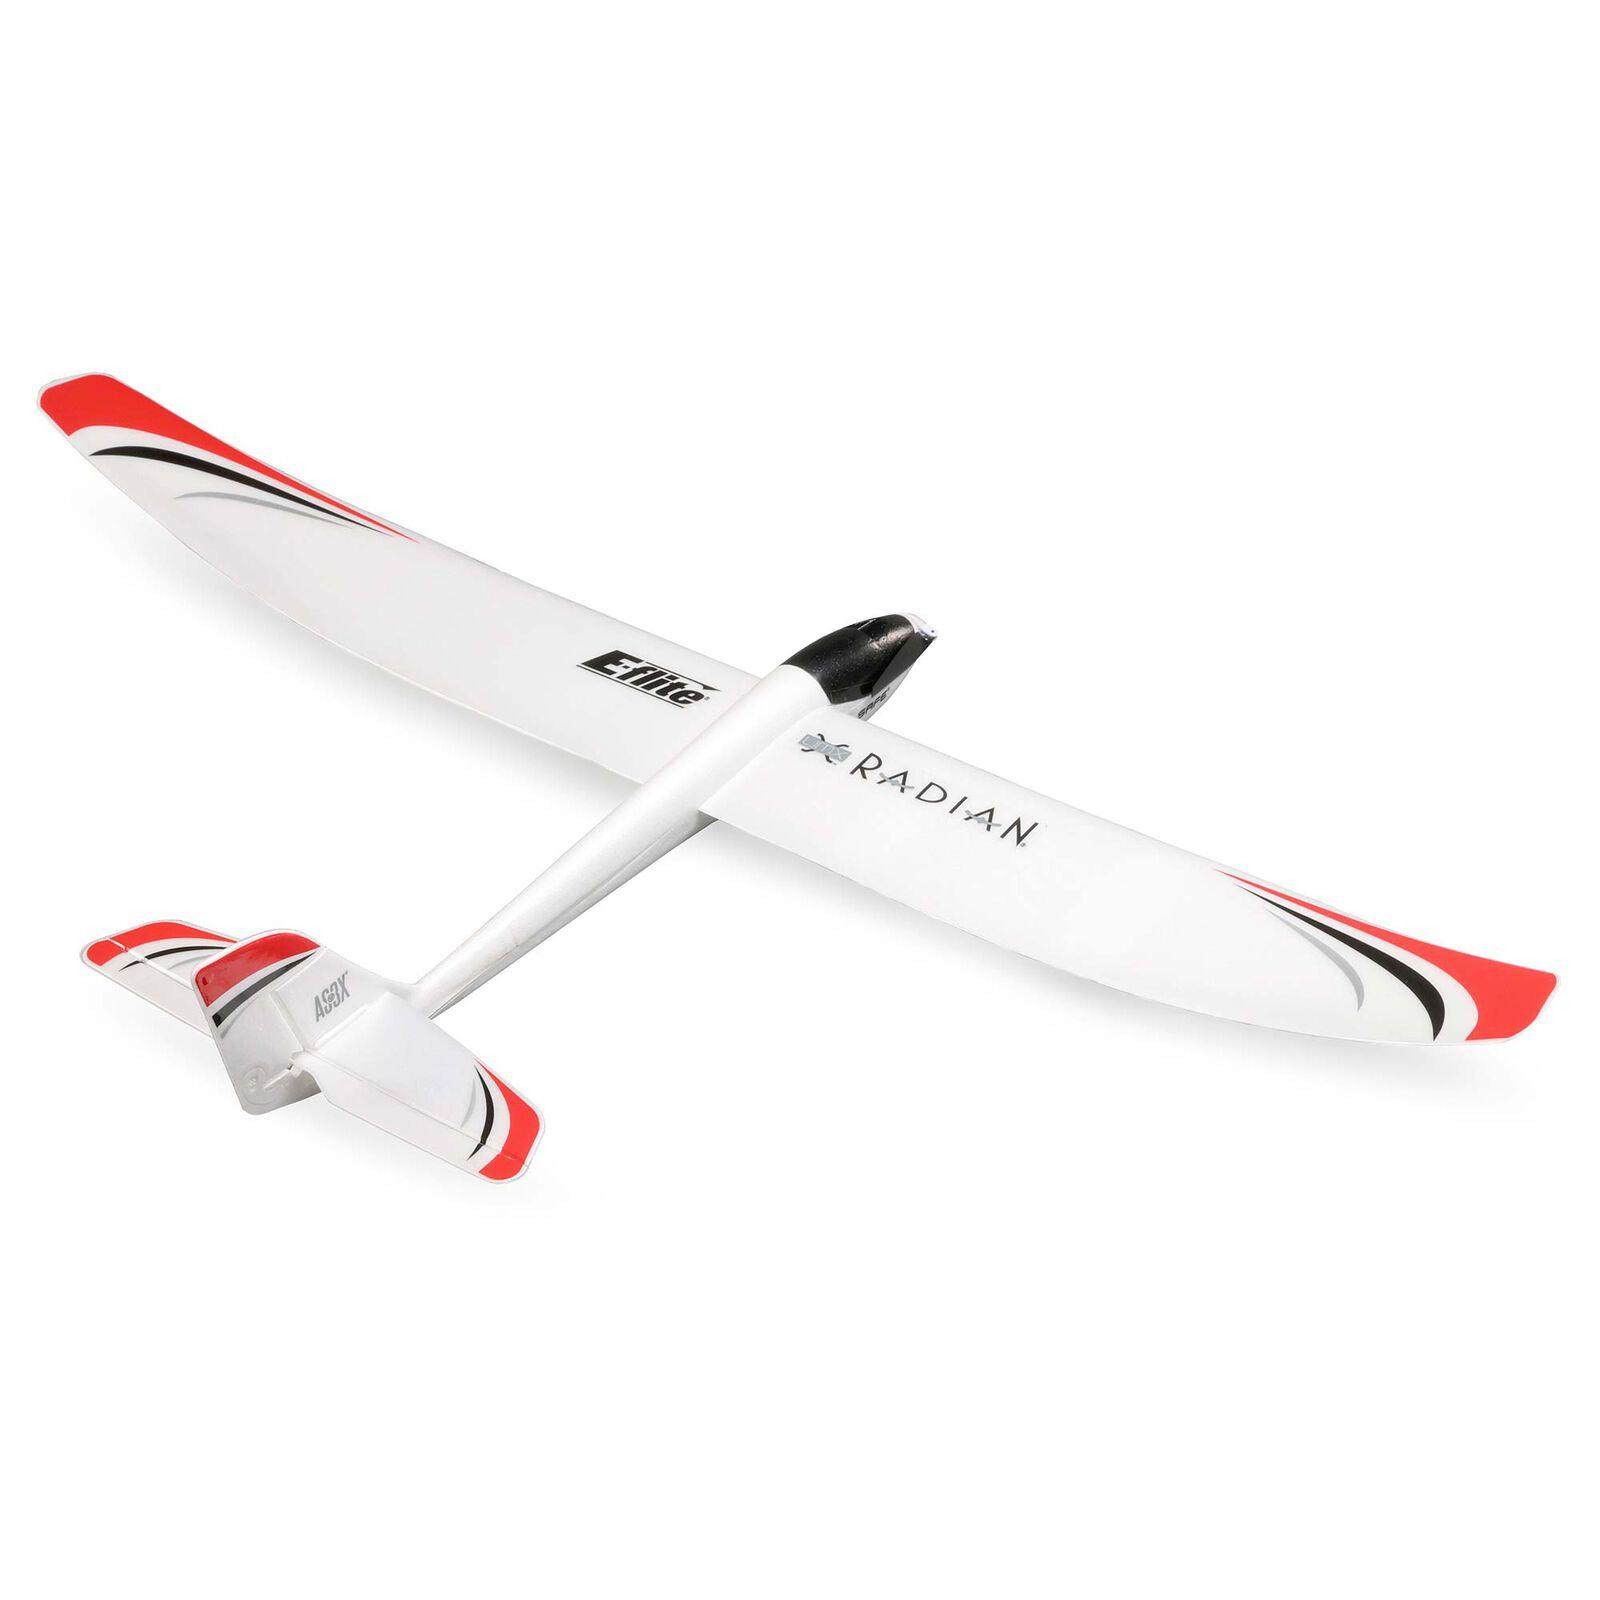 Radian Rc Plane: Benefits of AS3X Add-On for Radian RC Plane